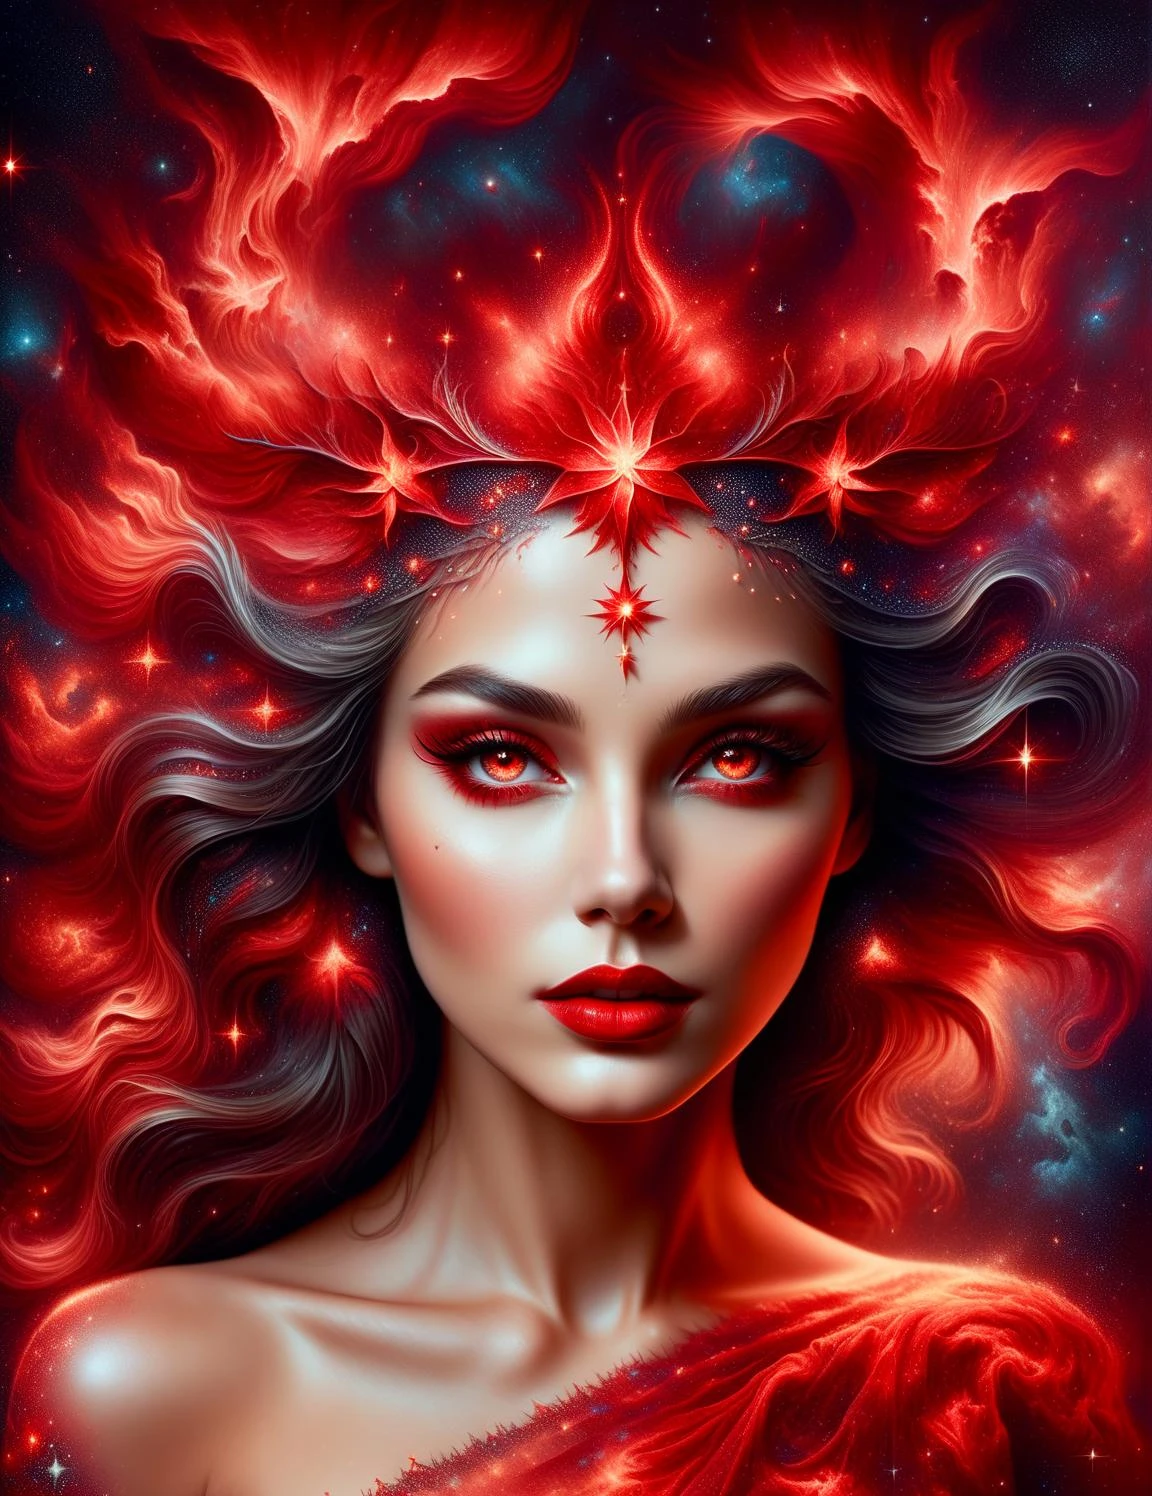 ragingnebula,high quality , dress made out of red stars, close up photo of very seductive red lips,sexy,beautiful,realistic,lifelike,studio photo,highly detailed,beautiful highly detailed eyes, dreamcore, Illustrations in the style of fantasy mythology, ultra realistic illustration, complementary colors